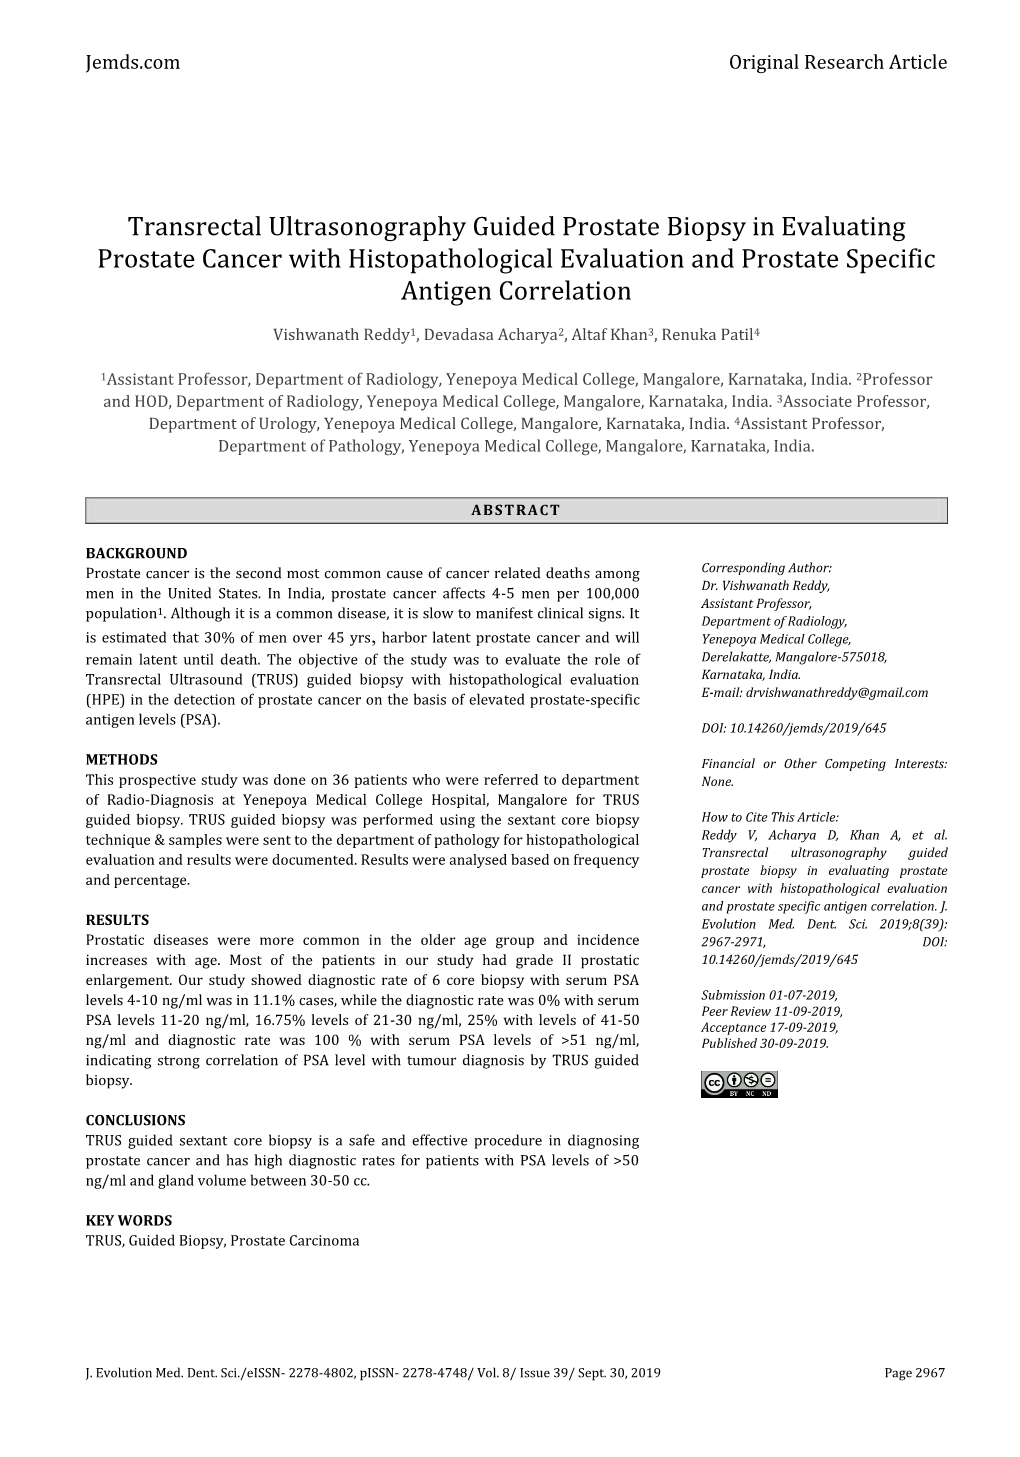 Transrectal Ultrasonography Guided Prostate Biopsy in Evaluating Prostate Cancer with Histopathological Evaluation and Prostate Specific Antigen Correlation